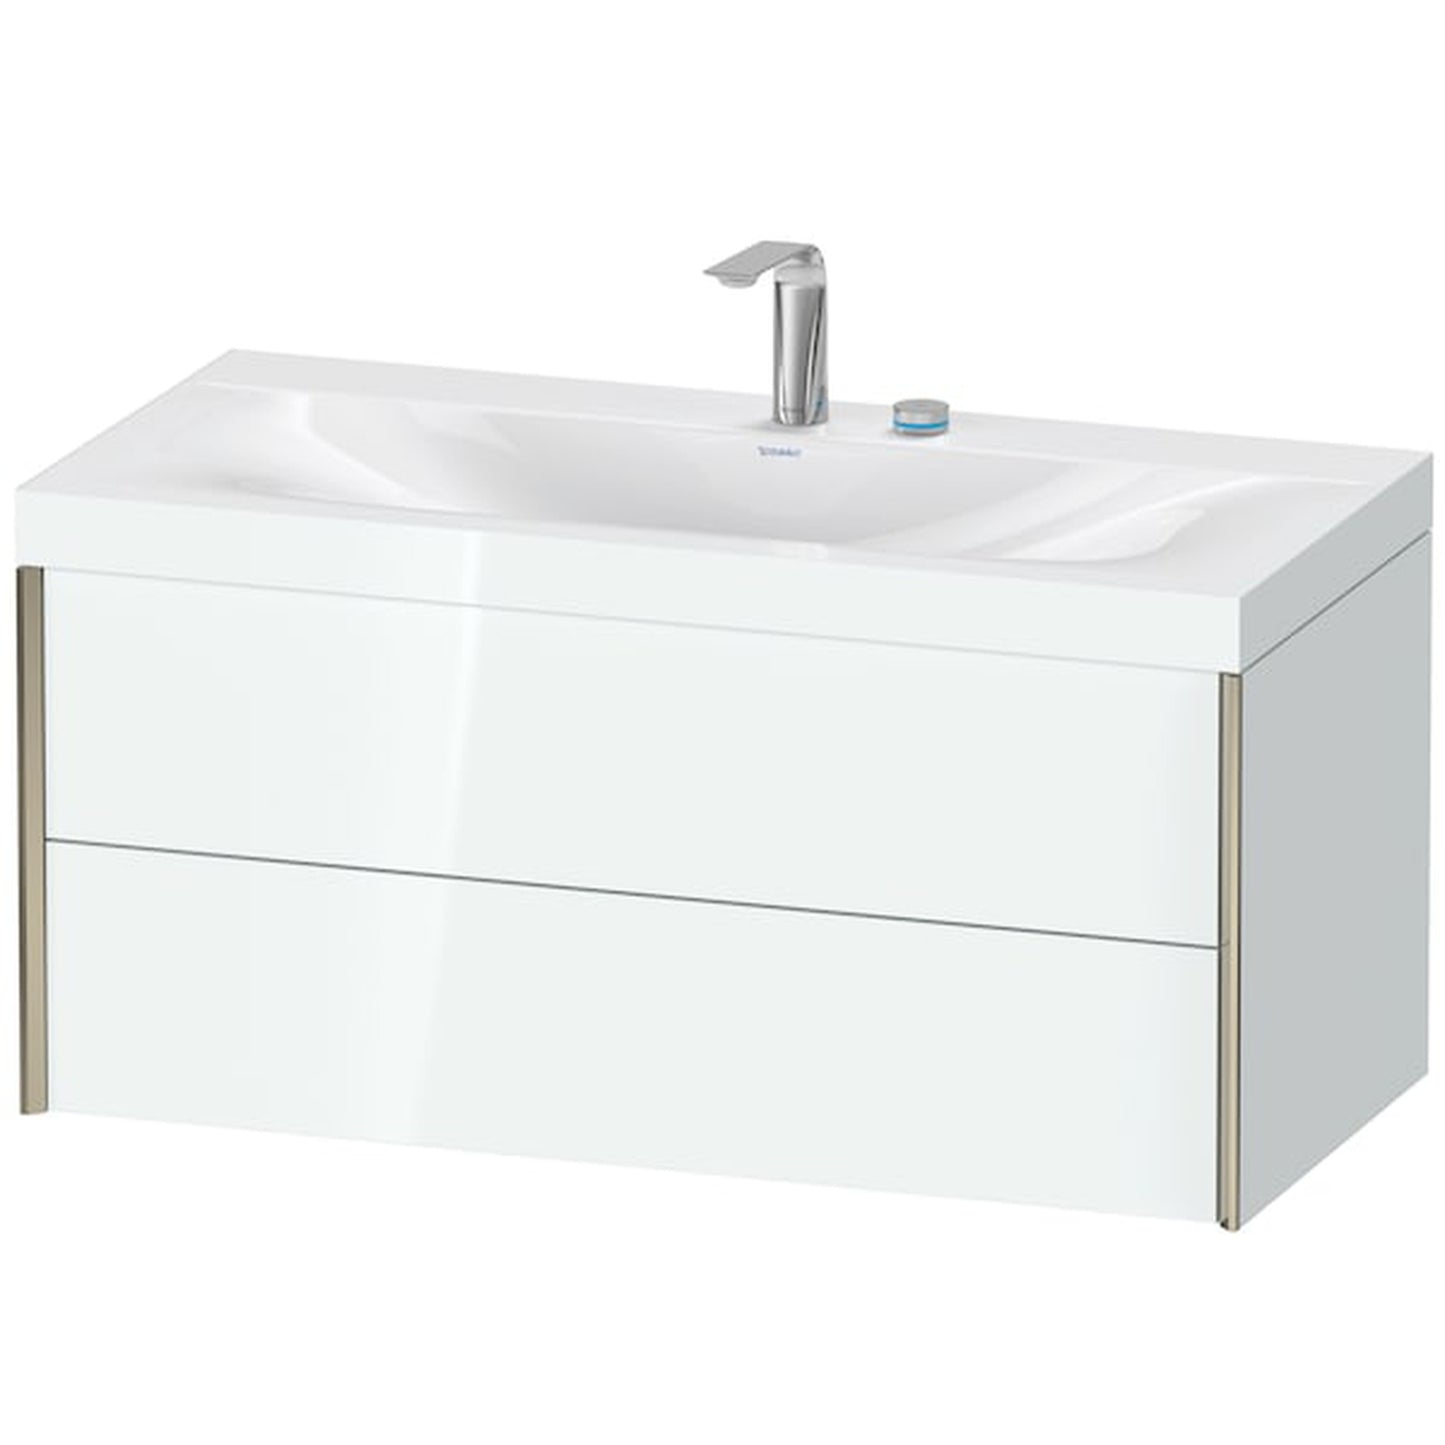 Duravit Xviu 39" x 20" x 19" Two Drawer C-Bonded Wall-Mount Vanity Kit With Two Tap Holes, White (XV4616EB185C)